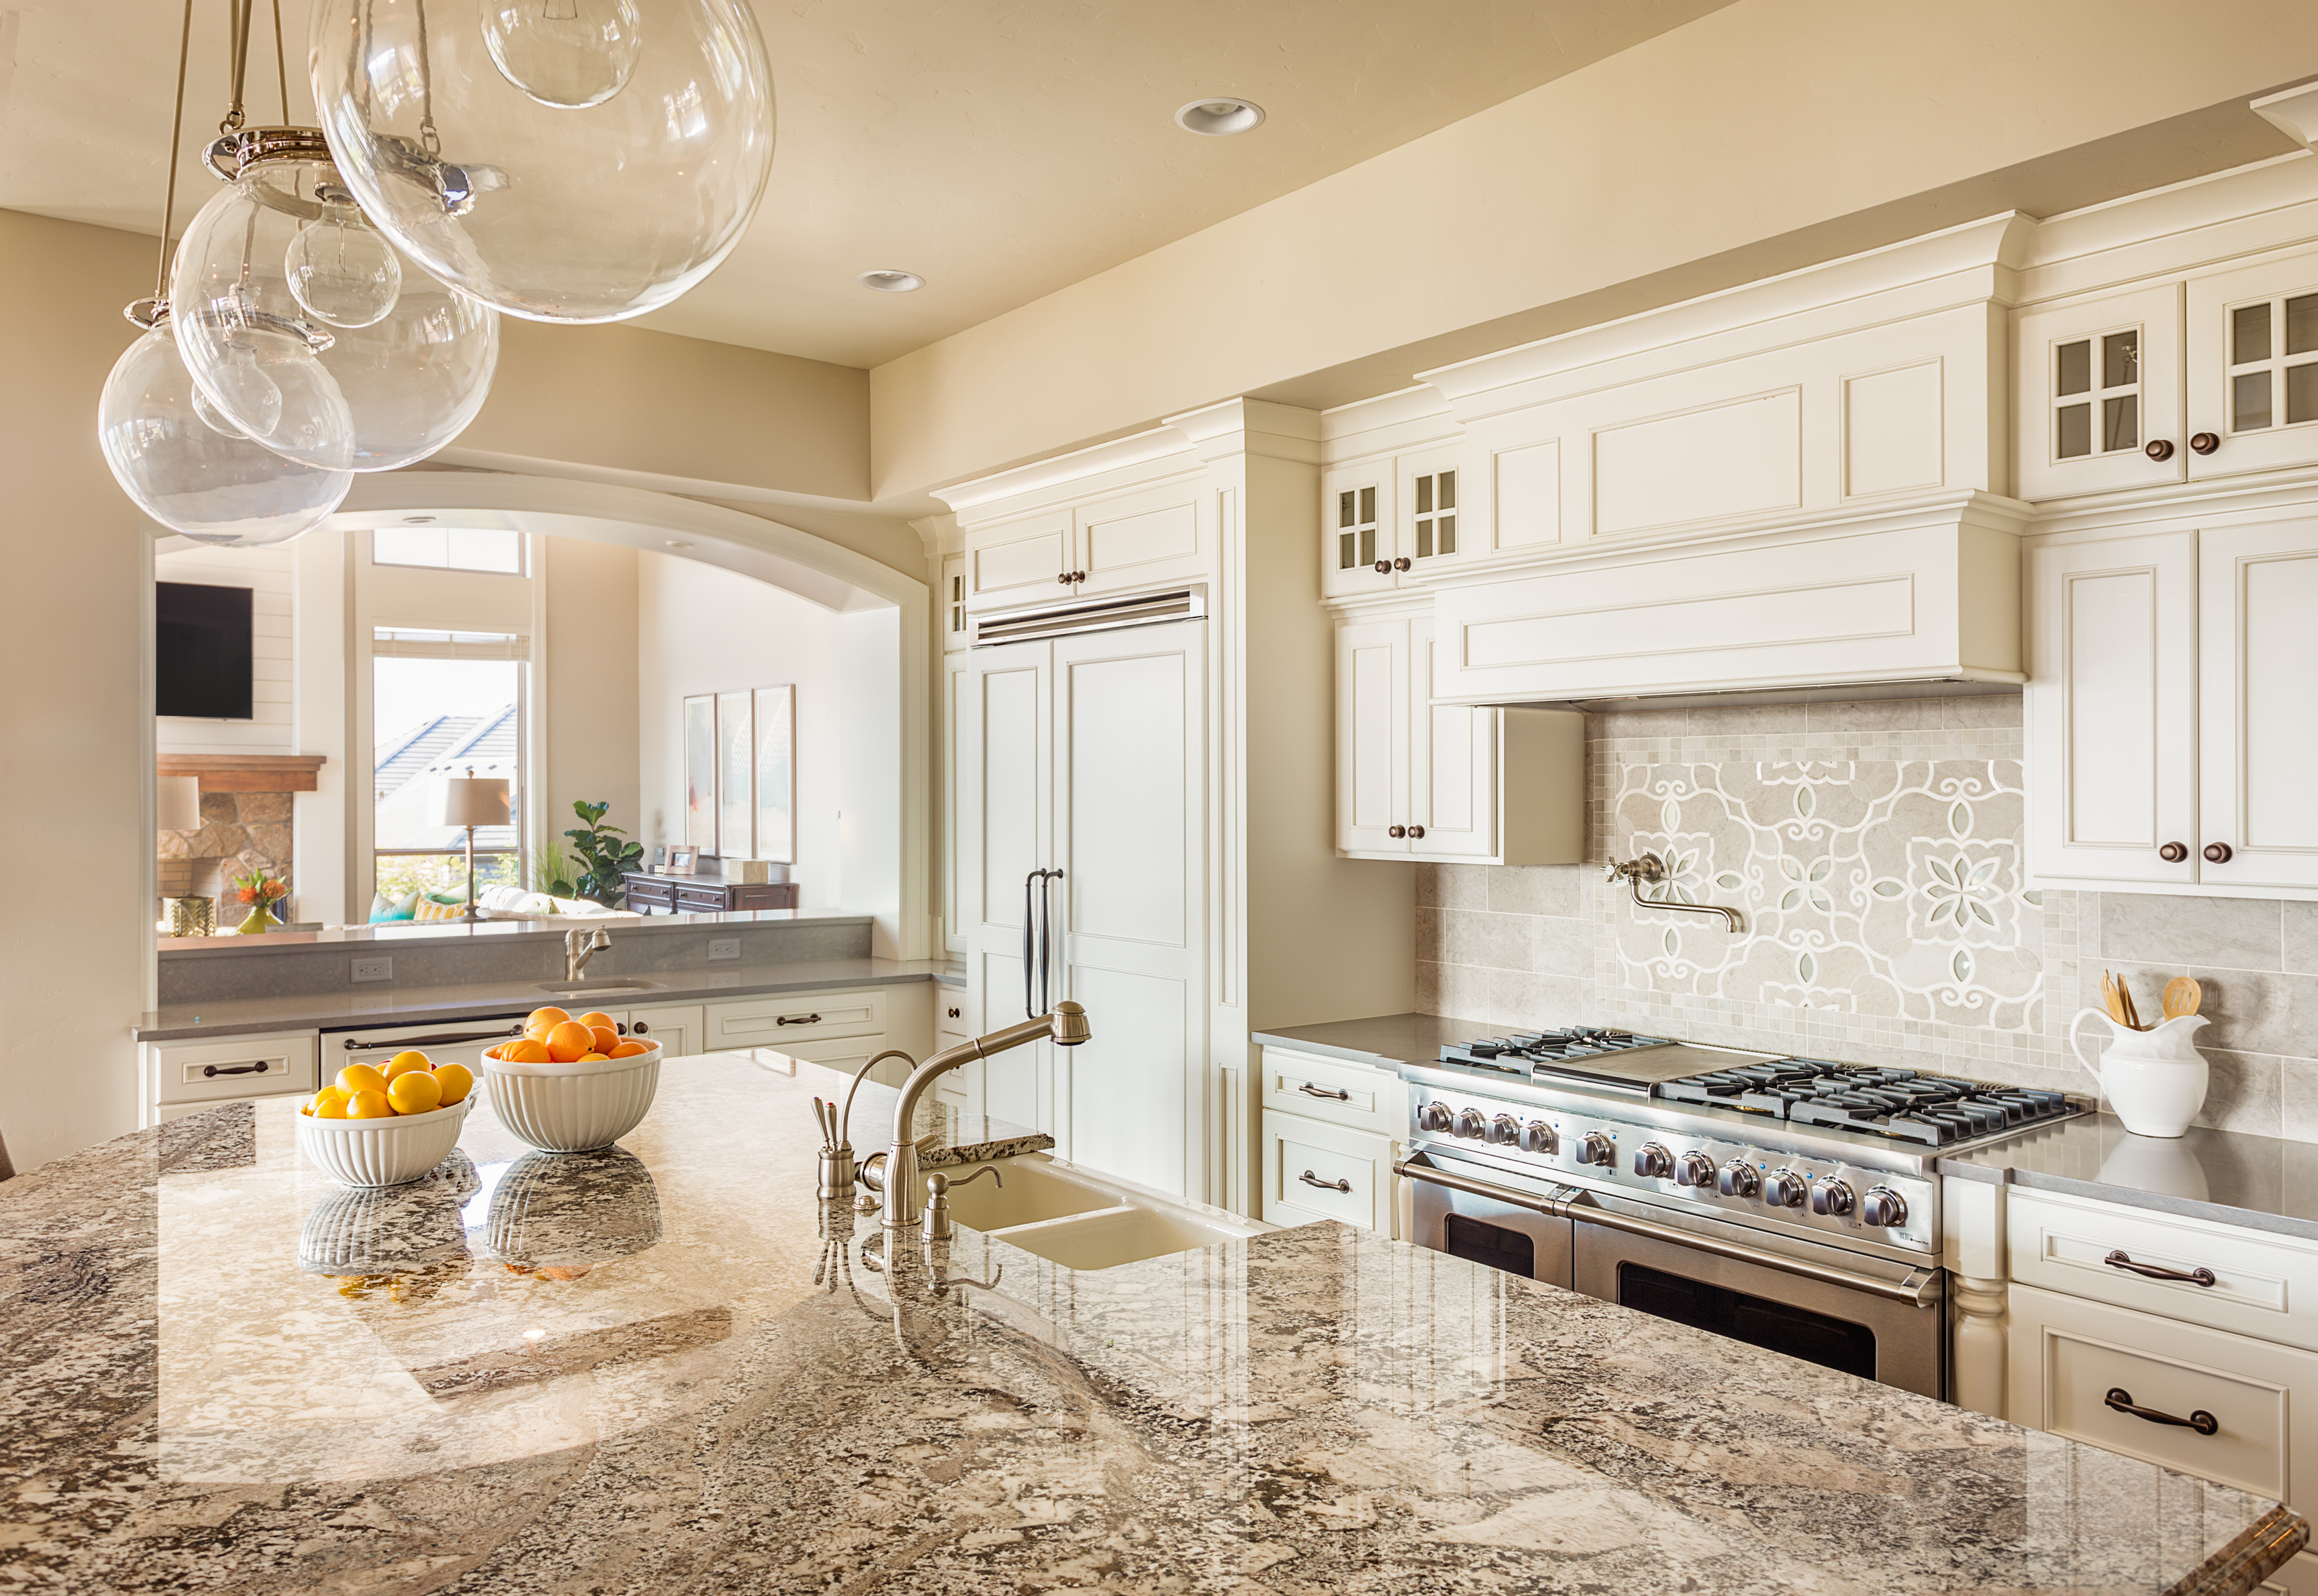 How to Start Planning Your Kitchen Remodeling Project